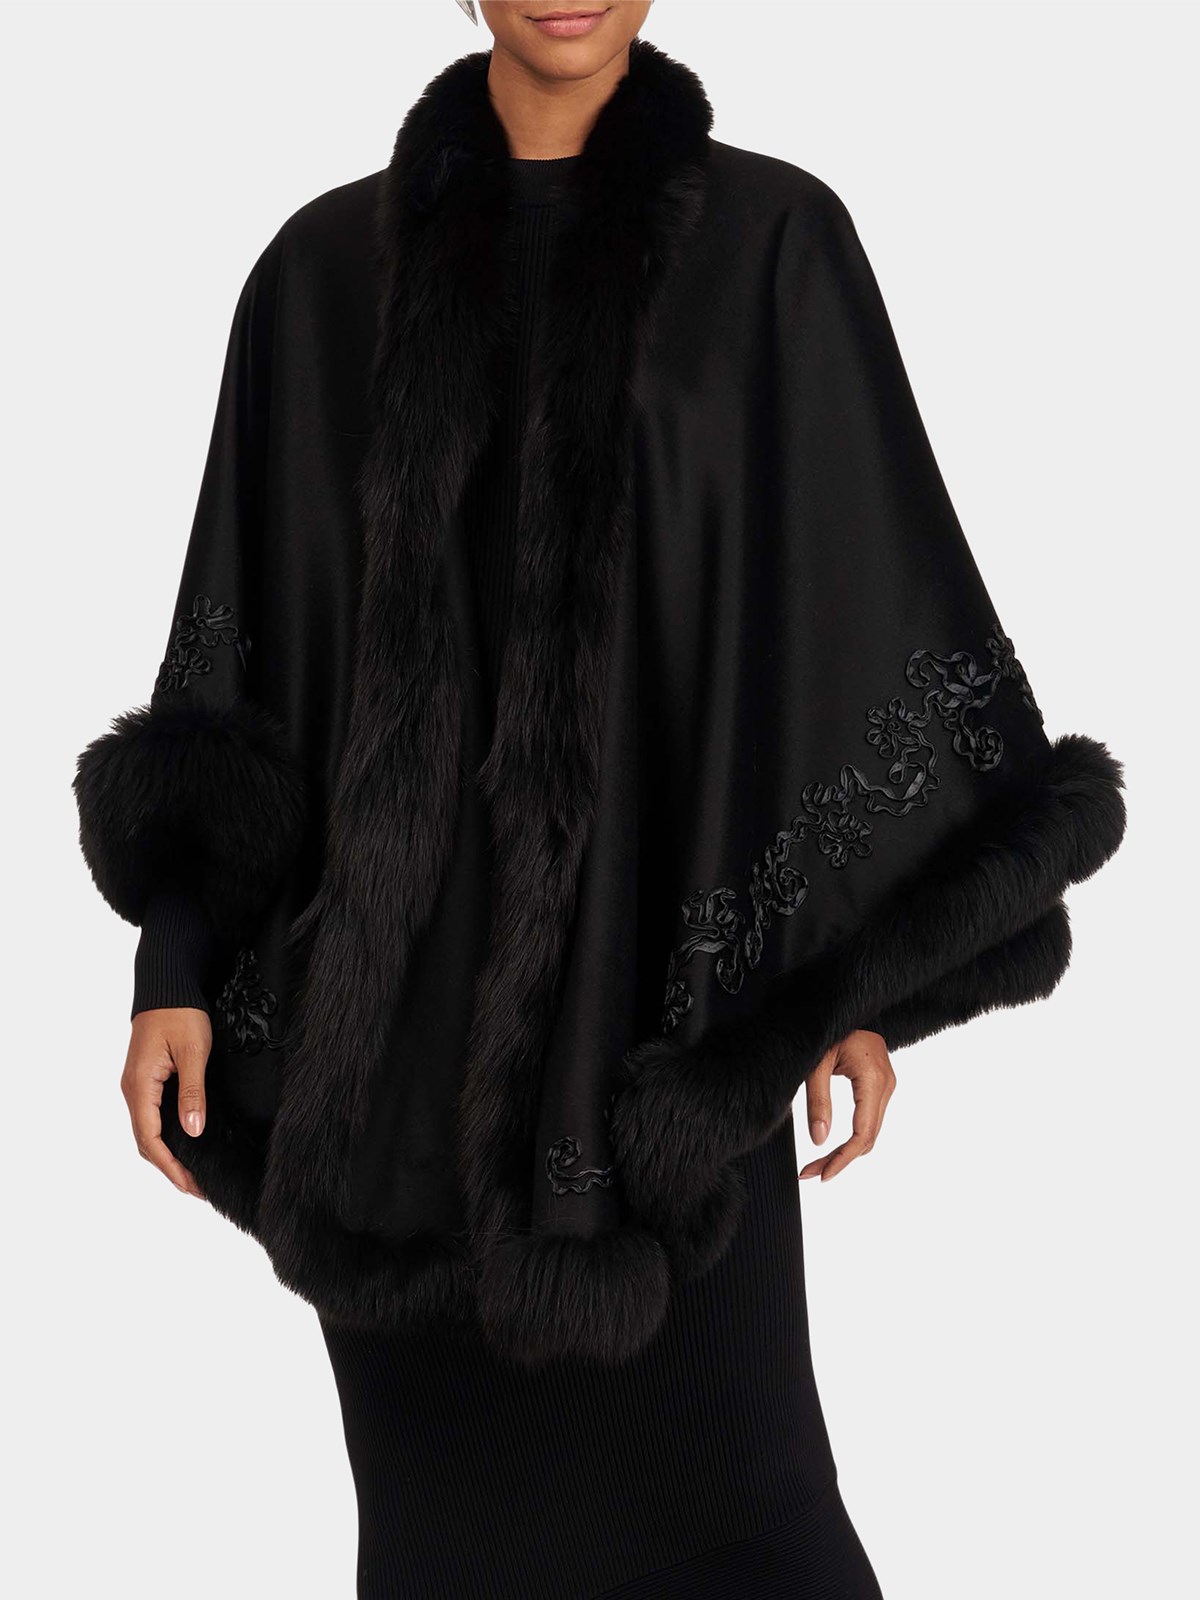 Woman's Black Wool and Cashmere Cape with Fox Trim